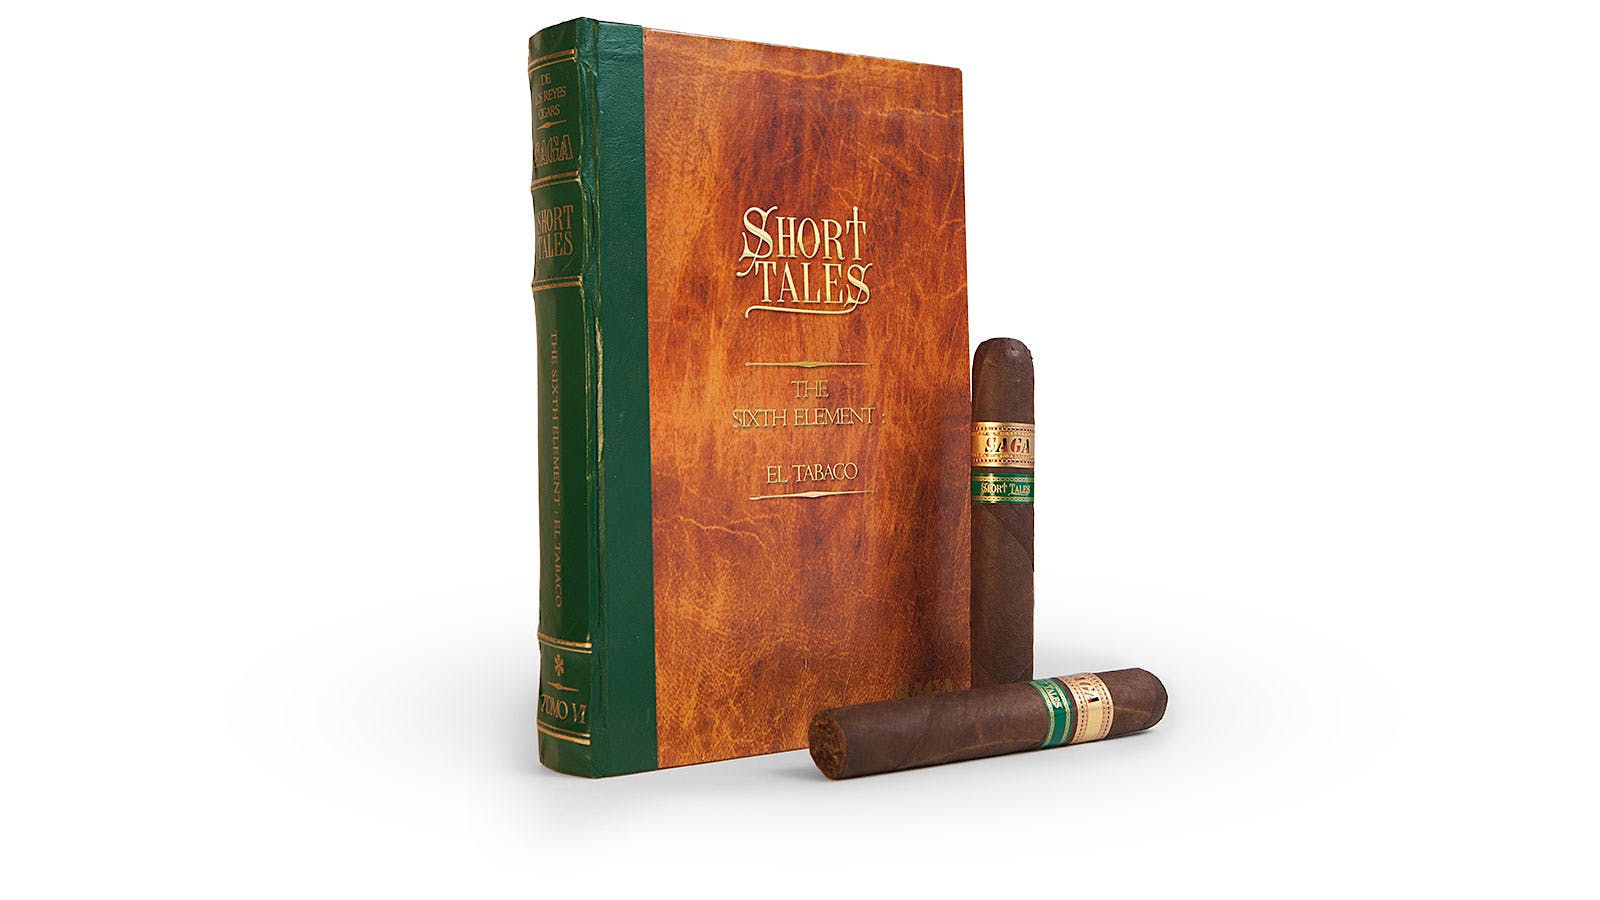 Cigars in the Saga Short Tales series come packaged in an interesting 10-count box made to look like an old volume of a vintage leather-bound book.